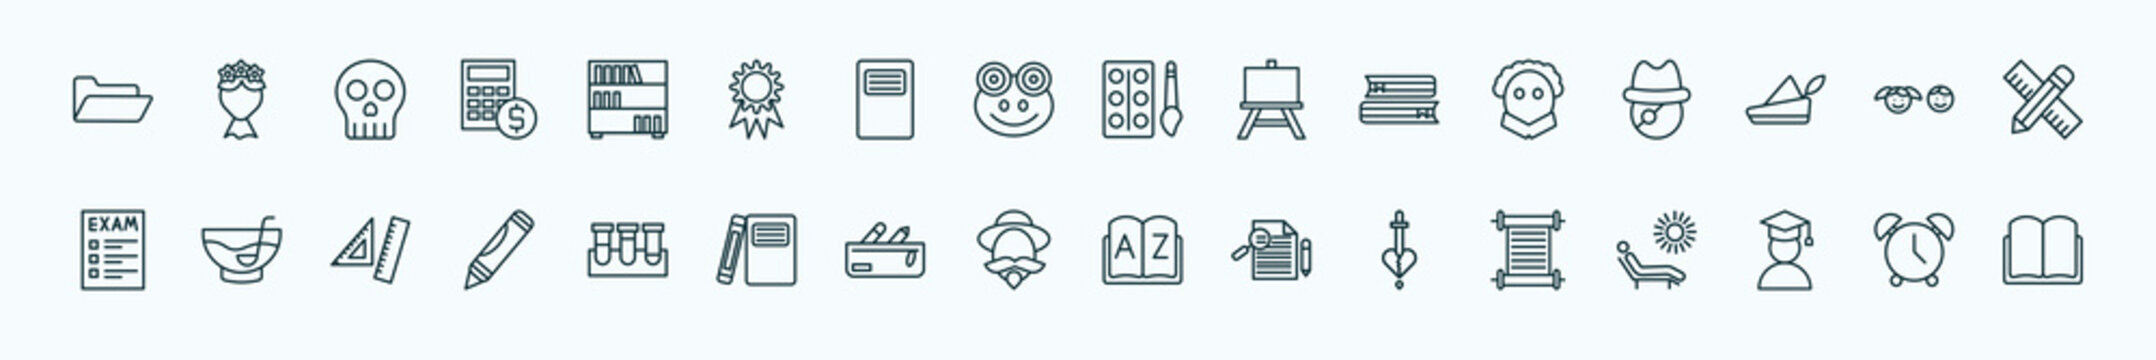 special lineal education icons set. outline icons such as folder, book shelf, watercolor, othello, kids, punch bowl, test tubes, don quixote, romeo and juliet, student, alarm clock line icons.